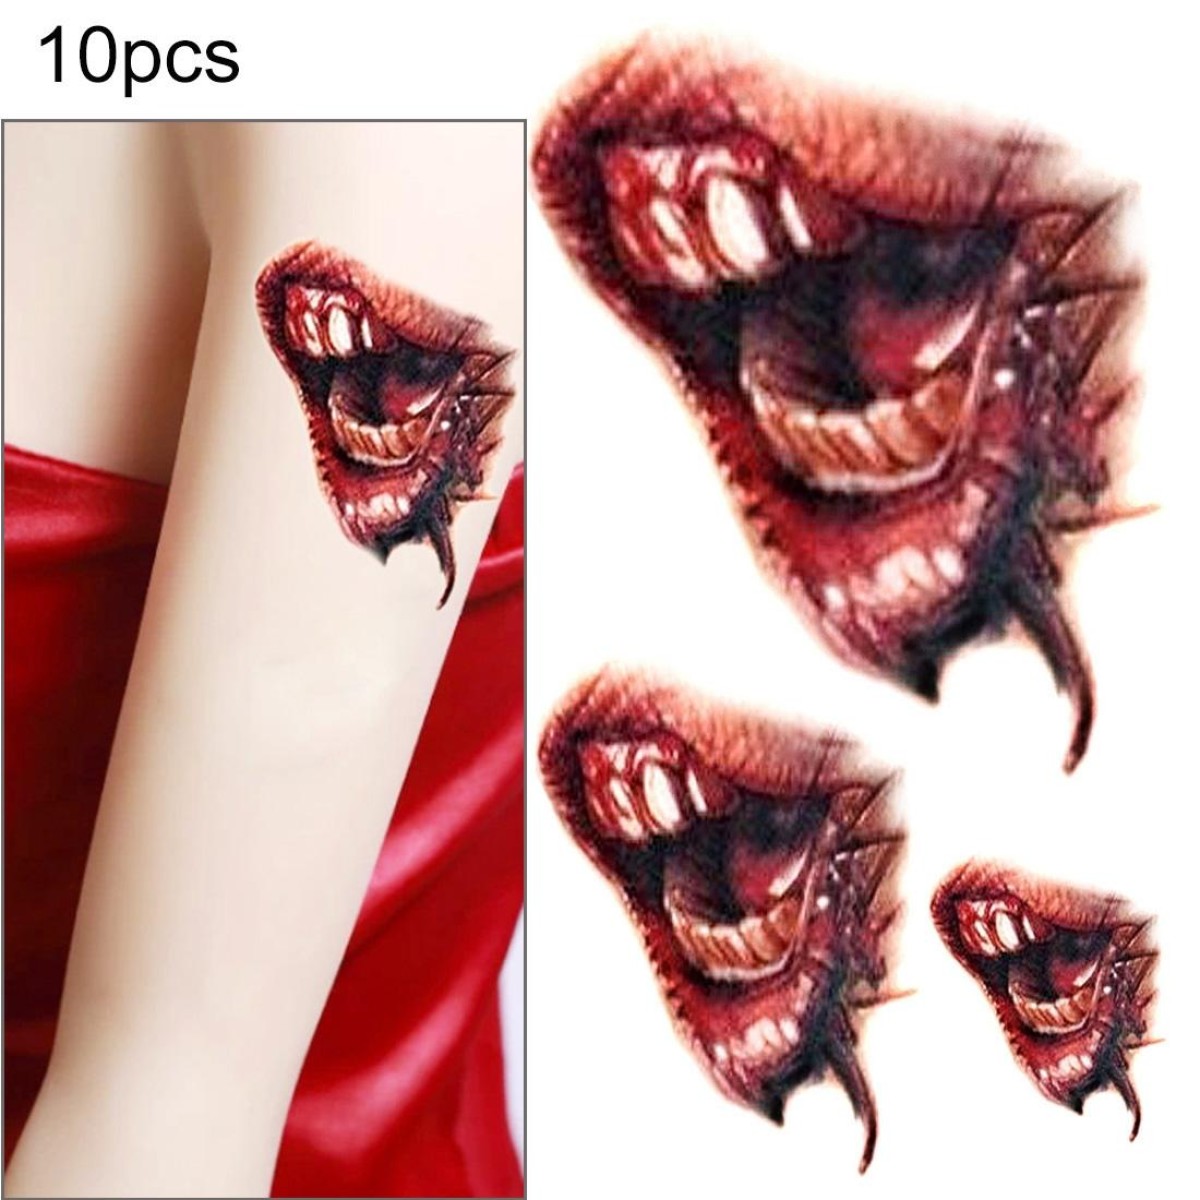 10pcs S-297 Halloween Terror Realistic Wound Blood Mouth Temporary Tattoo Sticker